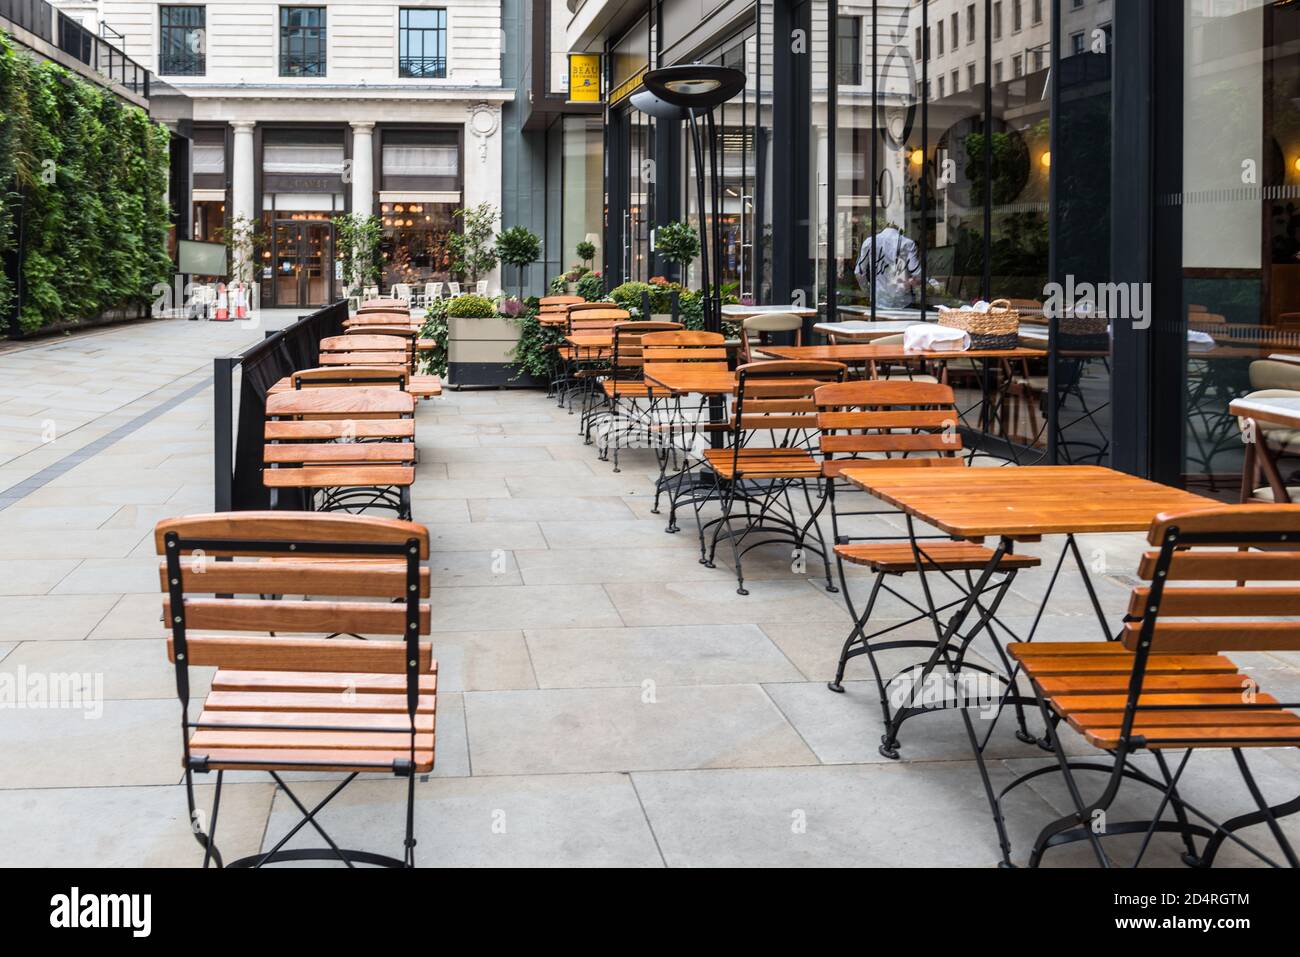 Alfresco Outdoor cafe and restaurant seating in London Haymarket Stock Photo